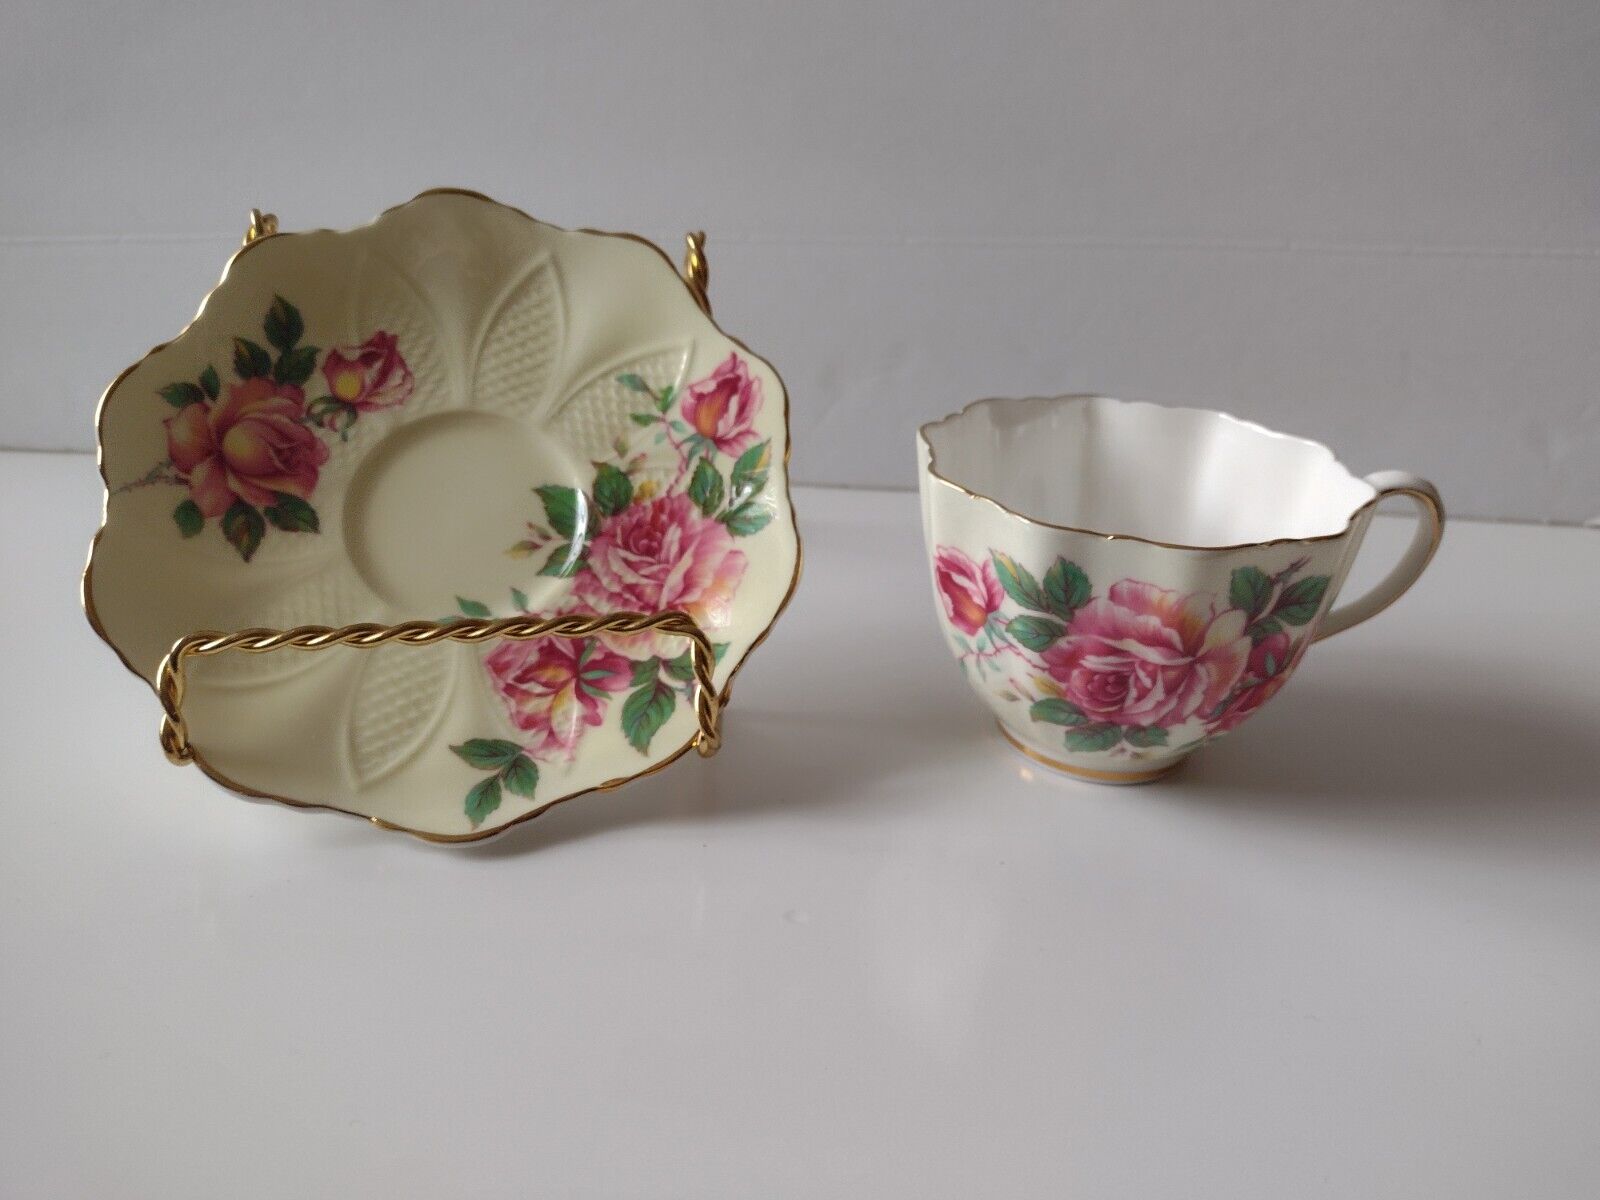 RARE Antique PARAGON BY APPOINTMENT FINE BONE CHINA ENGLAND RED ROSES 